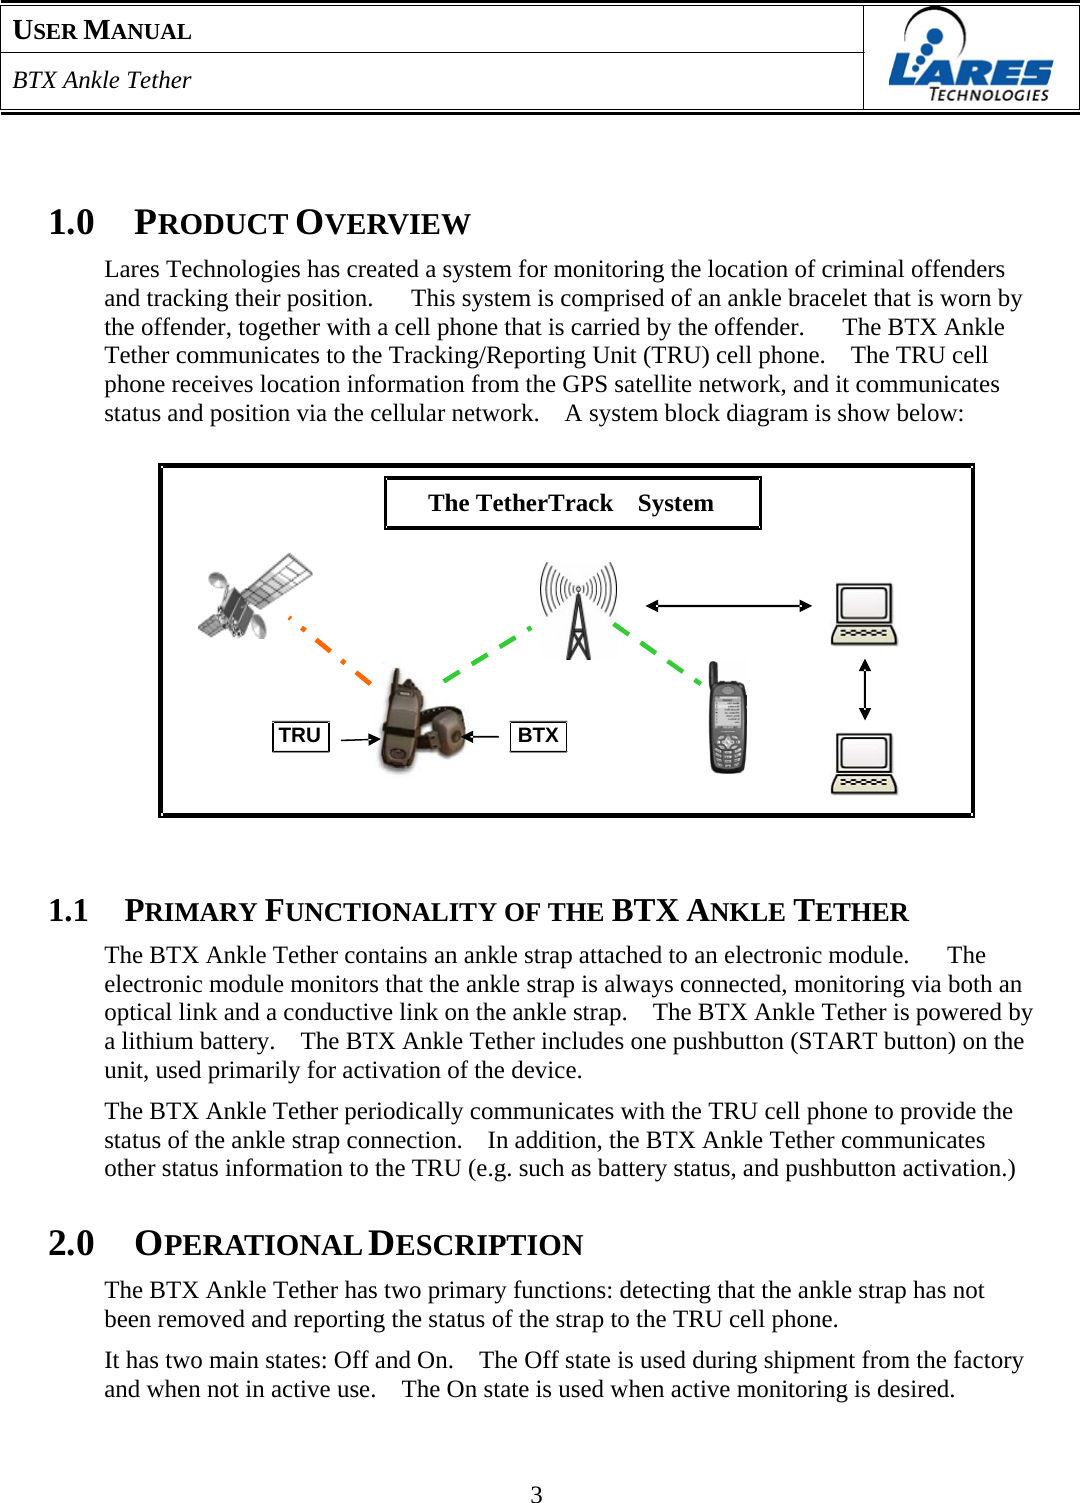 USER MANUAL  BTX Ankle Tether      1.0  PRODUCT OVERVIEW  Lares Technologies has created a system for monitoring the location of criminal offenders and tracking their position.      This system is comprised of an ankle bracelet that is worn by the offender, together with a cell phone that is carried by the offender.      The BTX Ankle Tether communicates to the Tracking/Reporting Unit (TRU) cell phone.    The TRU cell phone receives location information from the GPS satellite network, and it communicates status and position via the cellular network.    A system block diagram is show below:     The TetherTrack　 System           TRU BTX        1.1  PRIMARY FUNCTIONALITY OF THE BTX ANKLE TETHER  The BTX Ankle Tether contains an ankle strap attached to an electronic module.   The electronic module monitors that the ankle strap is always connected, monitoring via both an optical link and a conductive link on the ankle strap.    The BTX Ankle Tether is powered by a lithium battery.    The BTX Ankle Tether includes one pushbutton (START button) on the unit, used primarily for activation of the device.  The BTX Ankle Tether periodically communicates with the TRU cell phone to provide the status of the ankle strap connection.    In addition, the BTX Ankle Tether communicates other status information to the TRU (e.g. such as battery status, and pushbutton activation.)   2.0  OPERATIONAL DESCRIPTION  The BTX Ankle Tether has two primary functions: detecting that the ankle strap has not been removed and reporting the status of the strap to the TRU cell phone.  It has two main states: Off and On.    The Off state is used during shipment from the factory and when not in active use.    The On state is used when active monitoring is desired.     3 